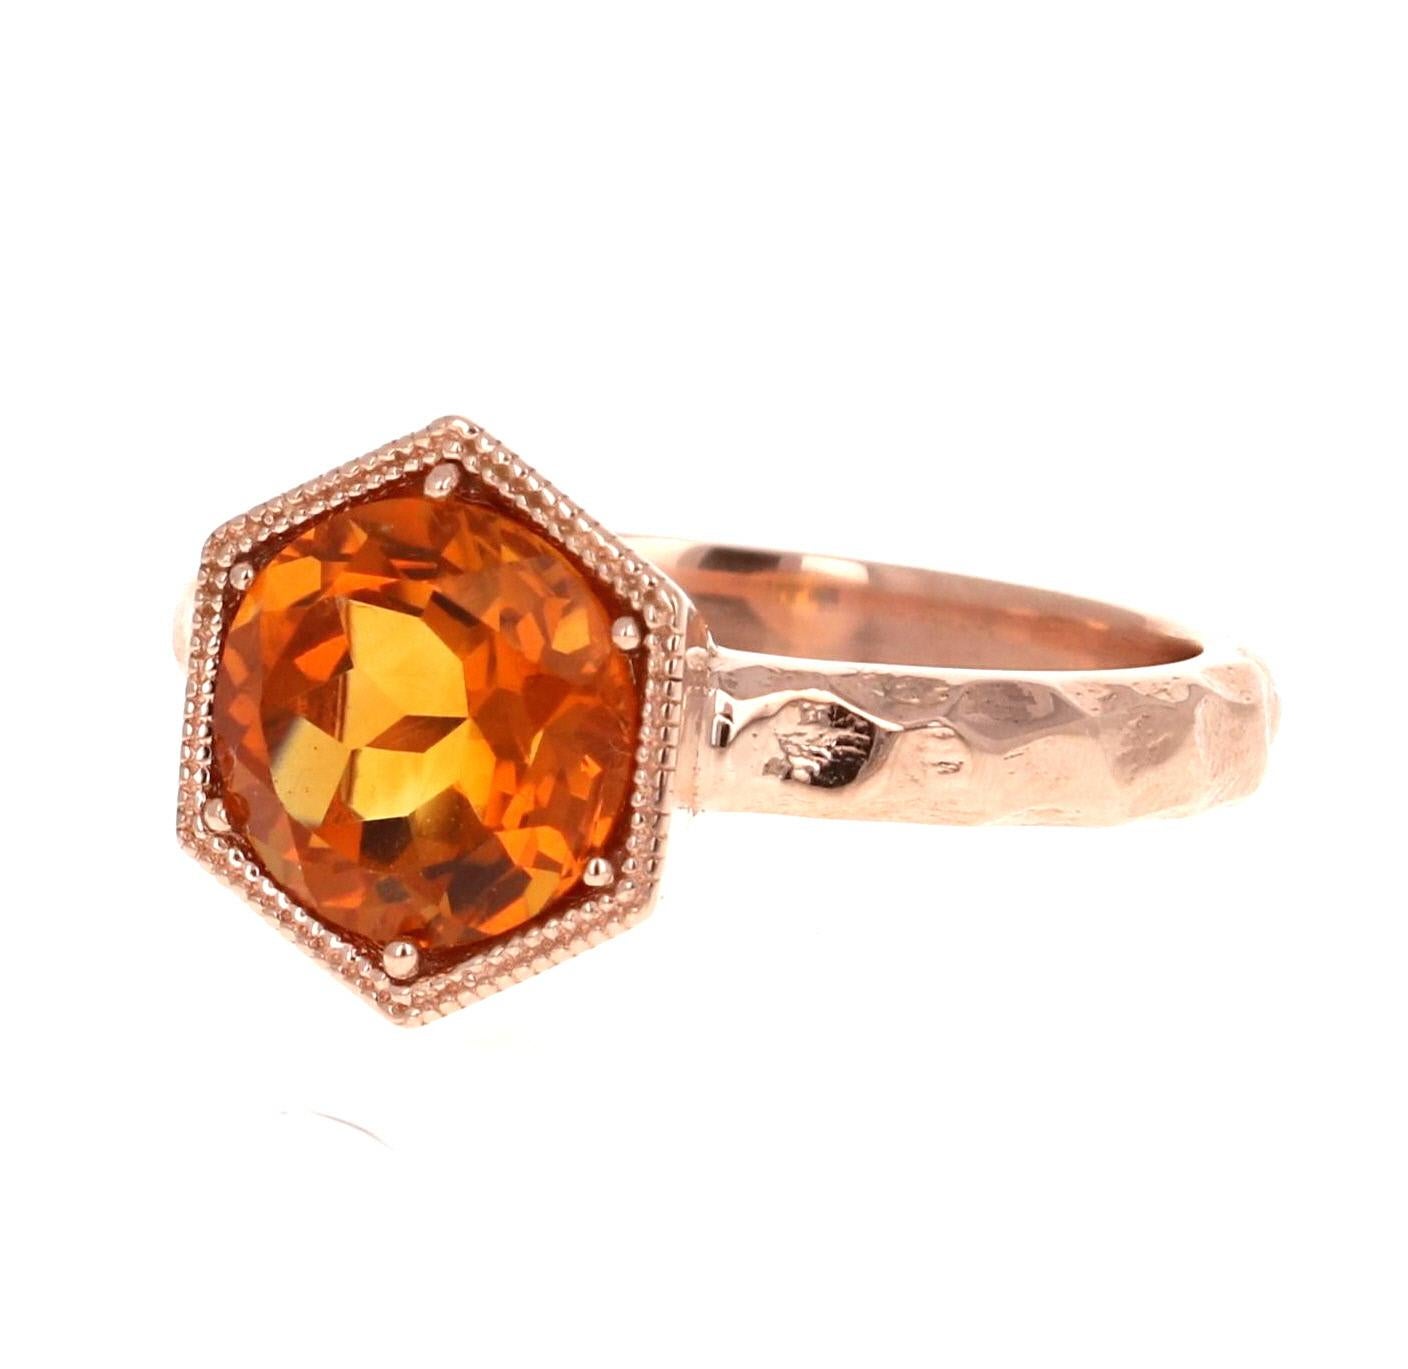 This beautiful and simple ring has a bright and vivid Round Cut Citrine Quartz in the center that weighs 1.78 carats. 
It is set in a beautifully crafted hammered style 14 Karat Rose Gold setting and weighs approximately 3.9 grams.
The ring is a